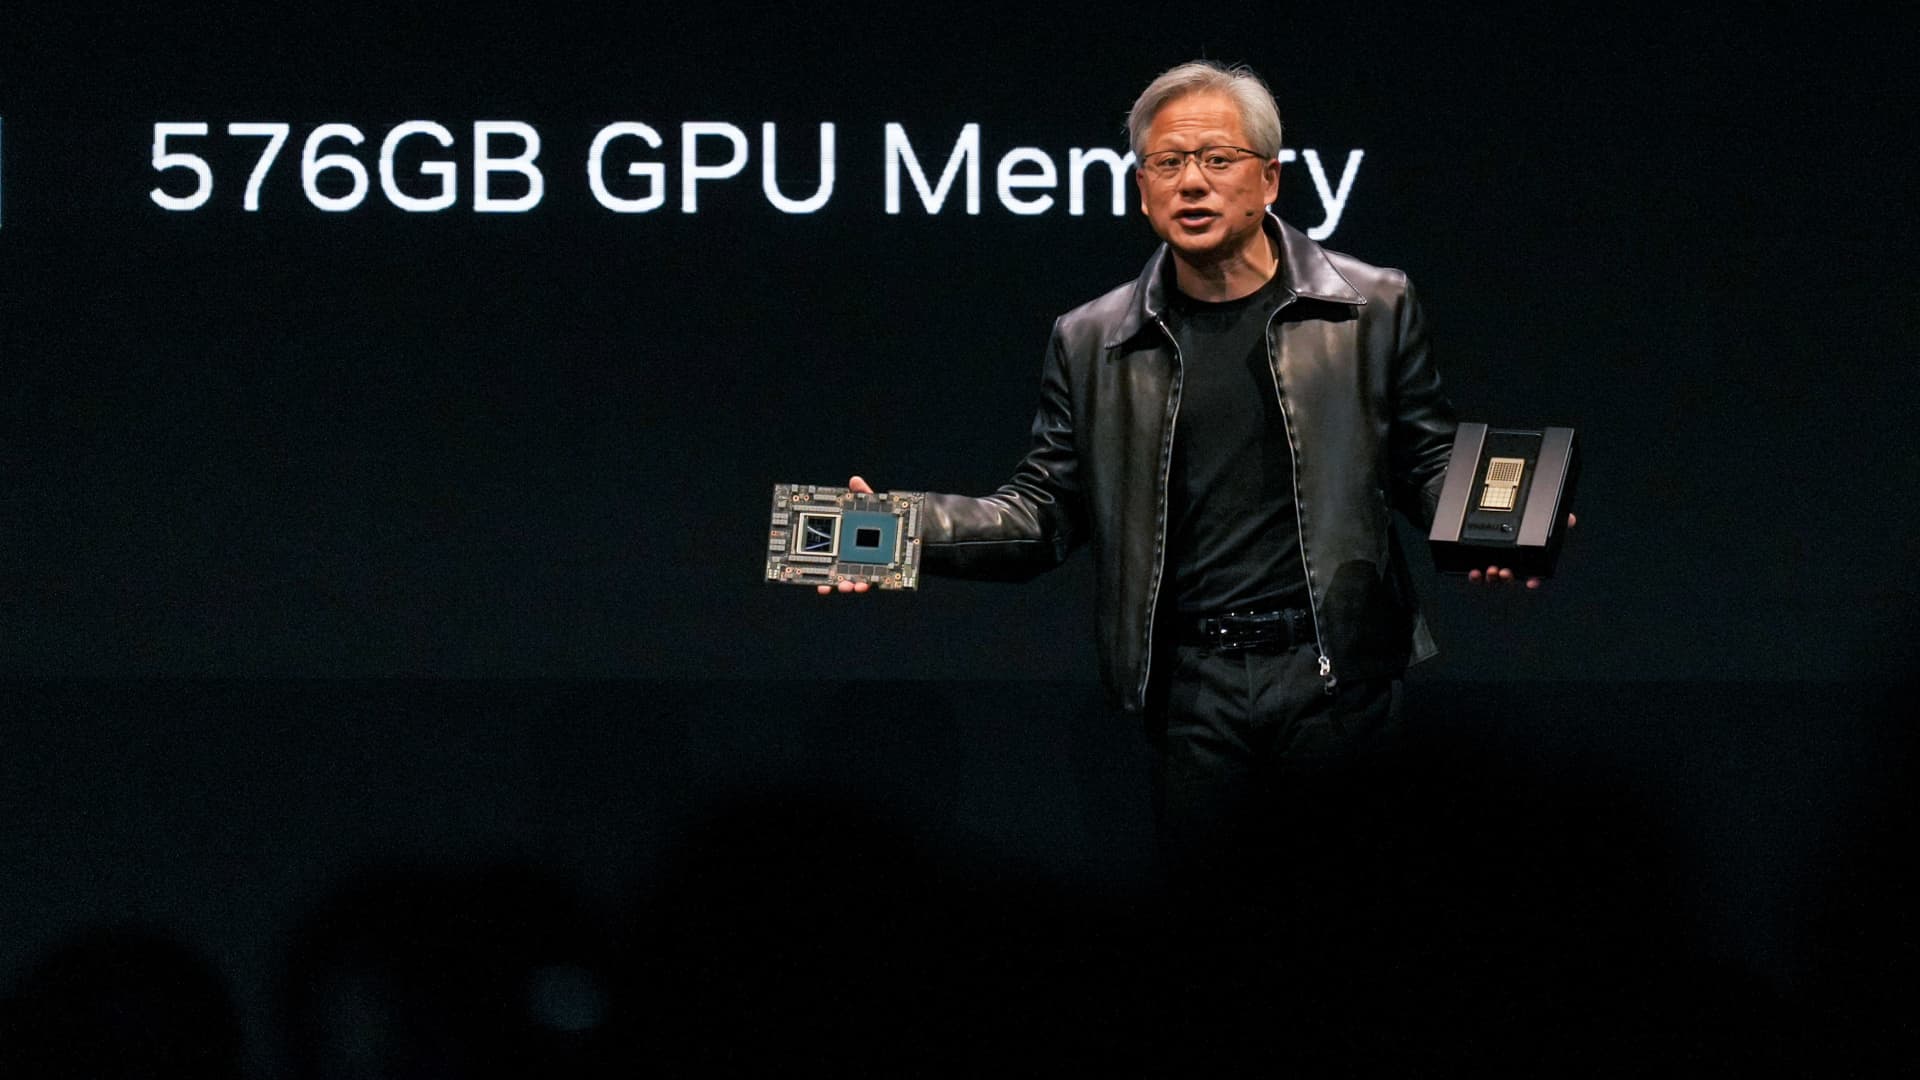 'Everyone is a programmer' with generative A.I., says Nvidia chief